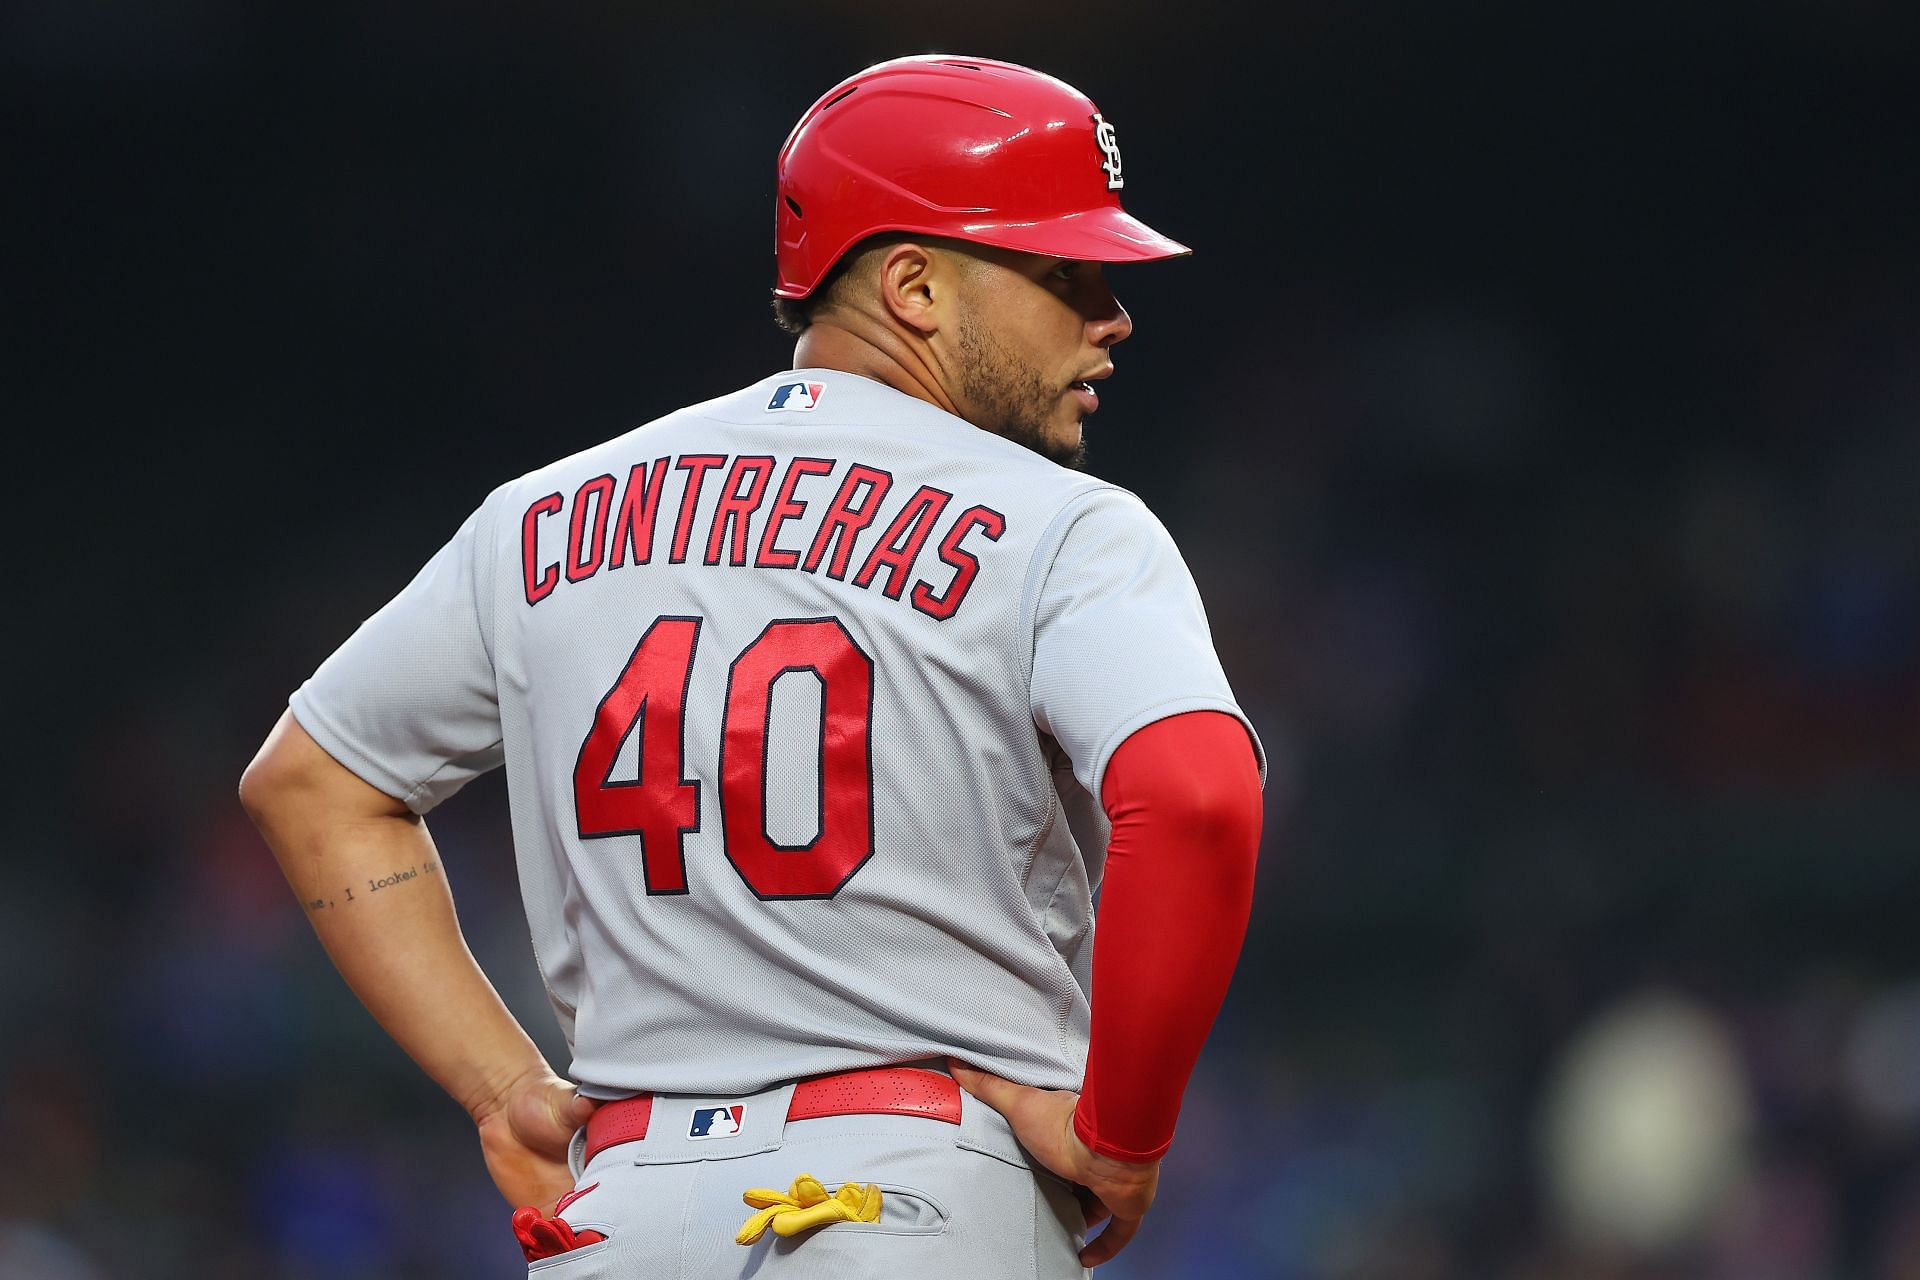 Surging Cardinals win with Willson Contreras behind the plate, equal  highest run total since 2000 